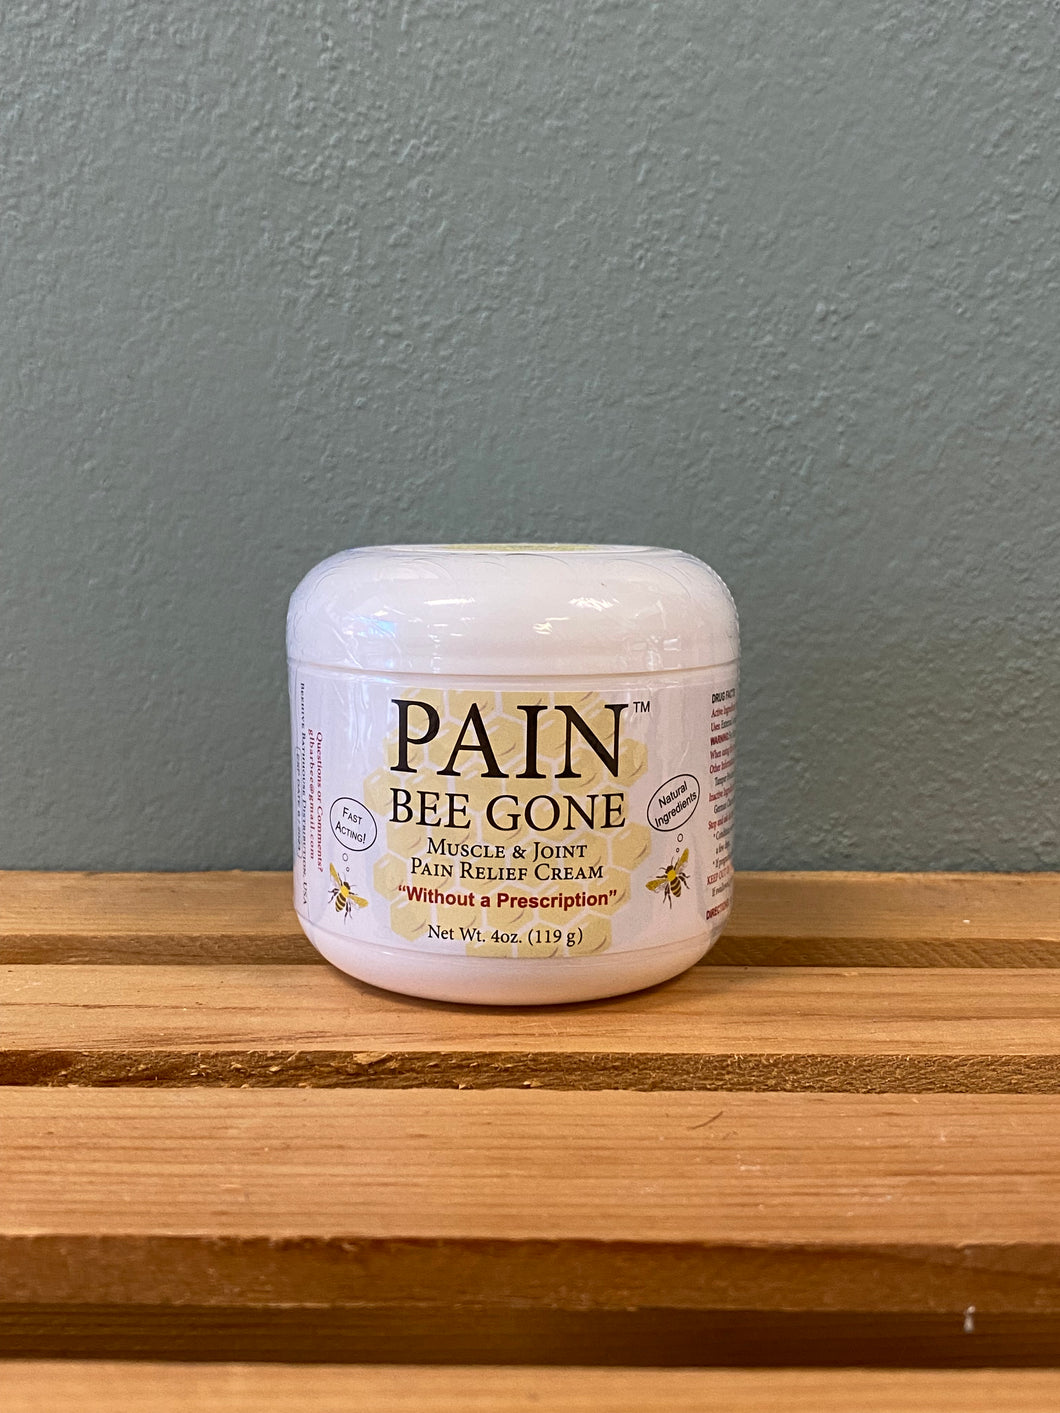 Pain Bee Gone Muscle & Joint Pain Relief Cream